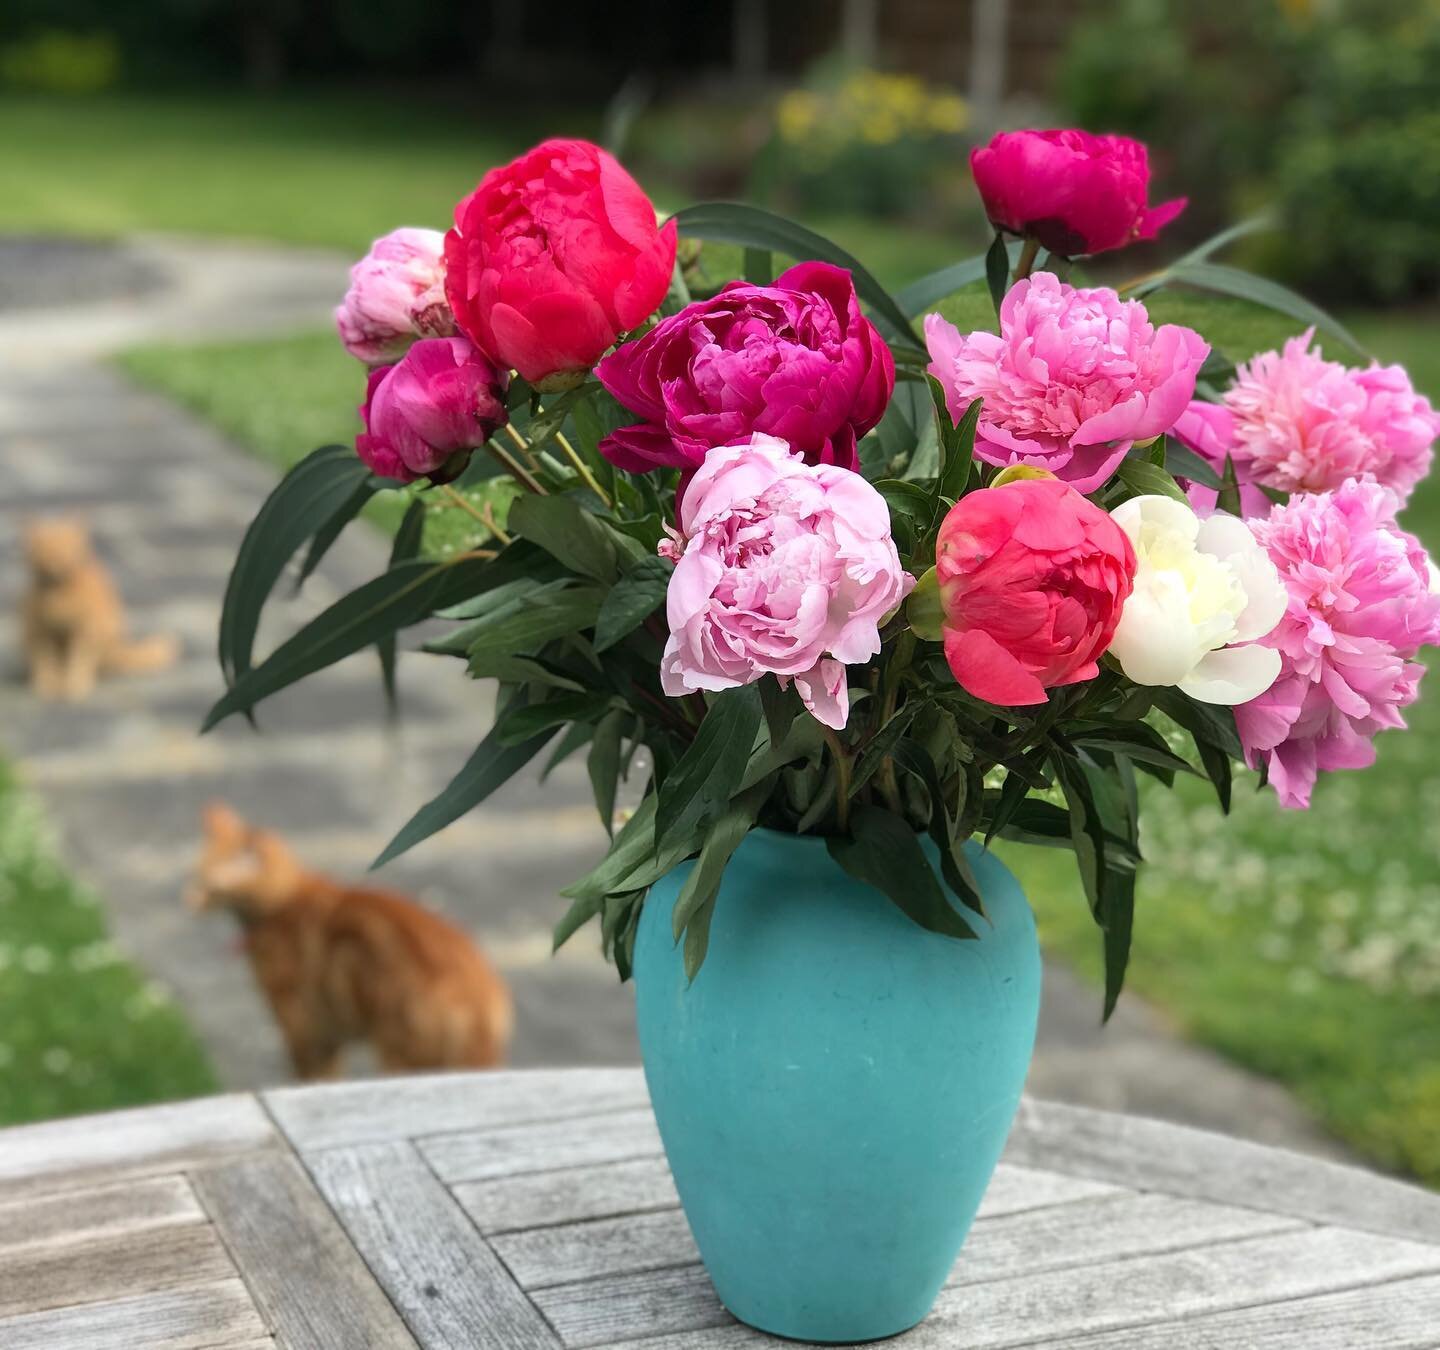 Look at the gorgeous peonies I gathered in my garden this morning 🌸🌺 In my dreams! I wish I were actually that green-fingered. In fact, they&rsquo;re a fragrant birthday gift from my lovely UK publishers @tworoadsbooks (thank you).

Picture photobo